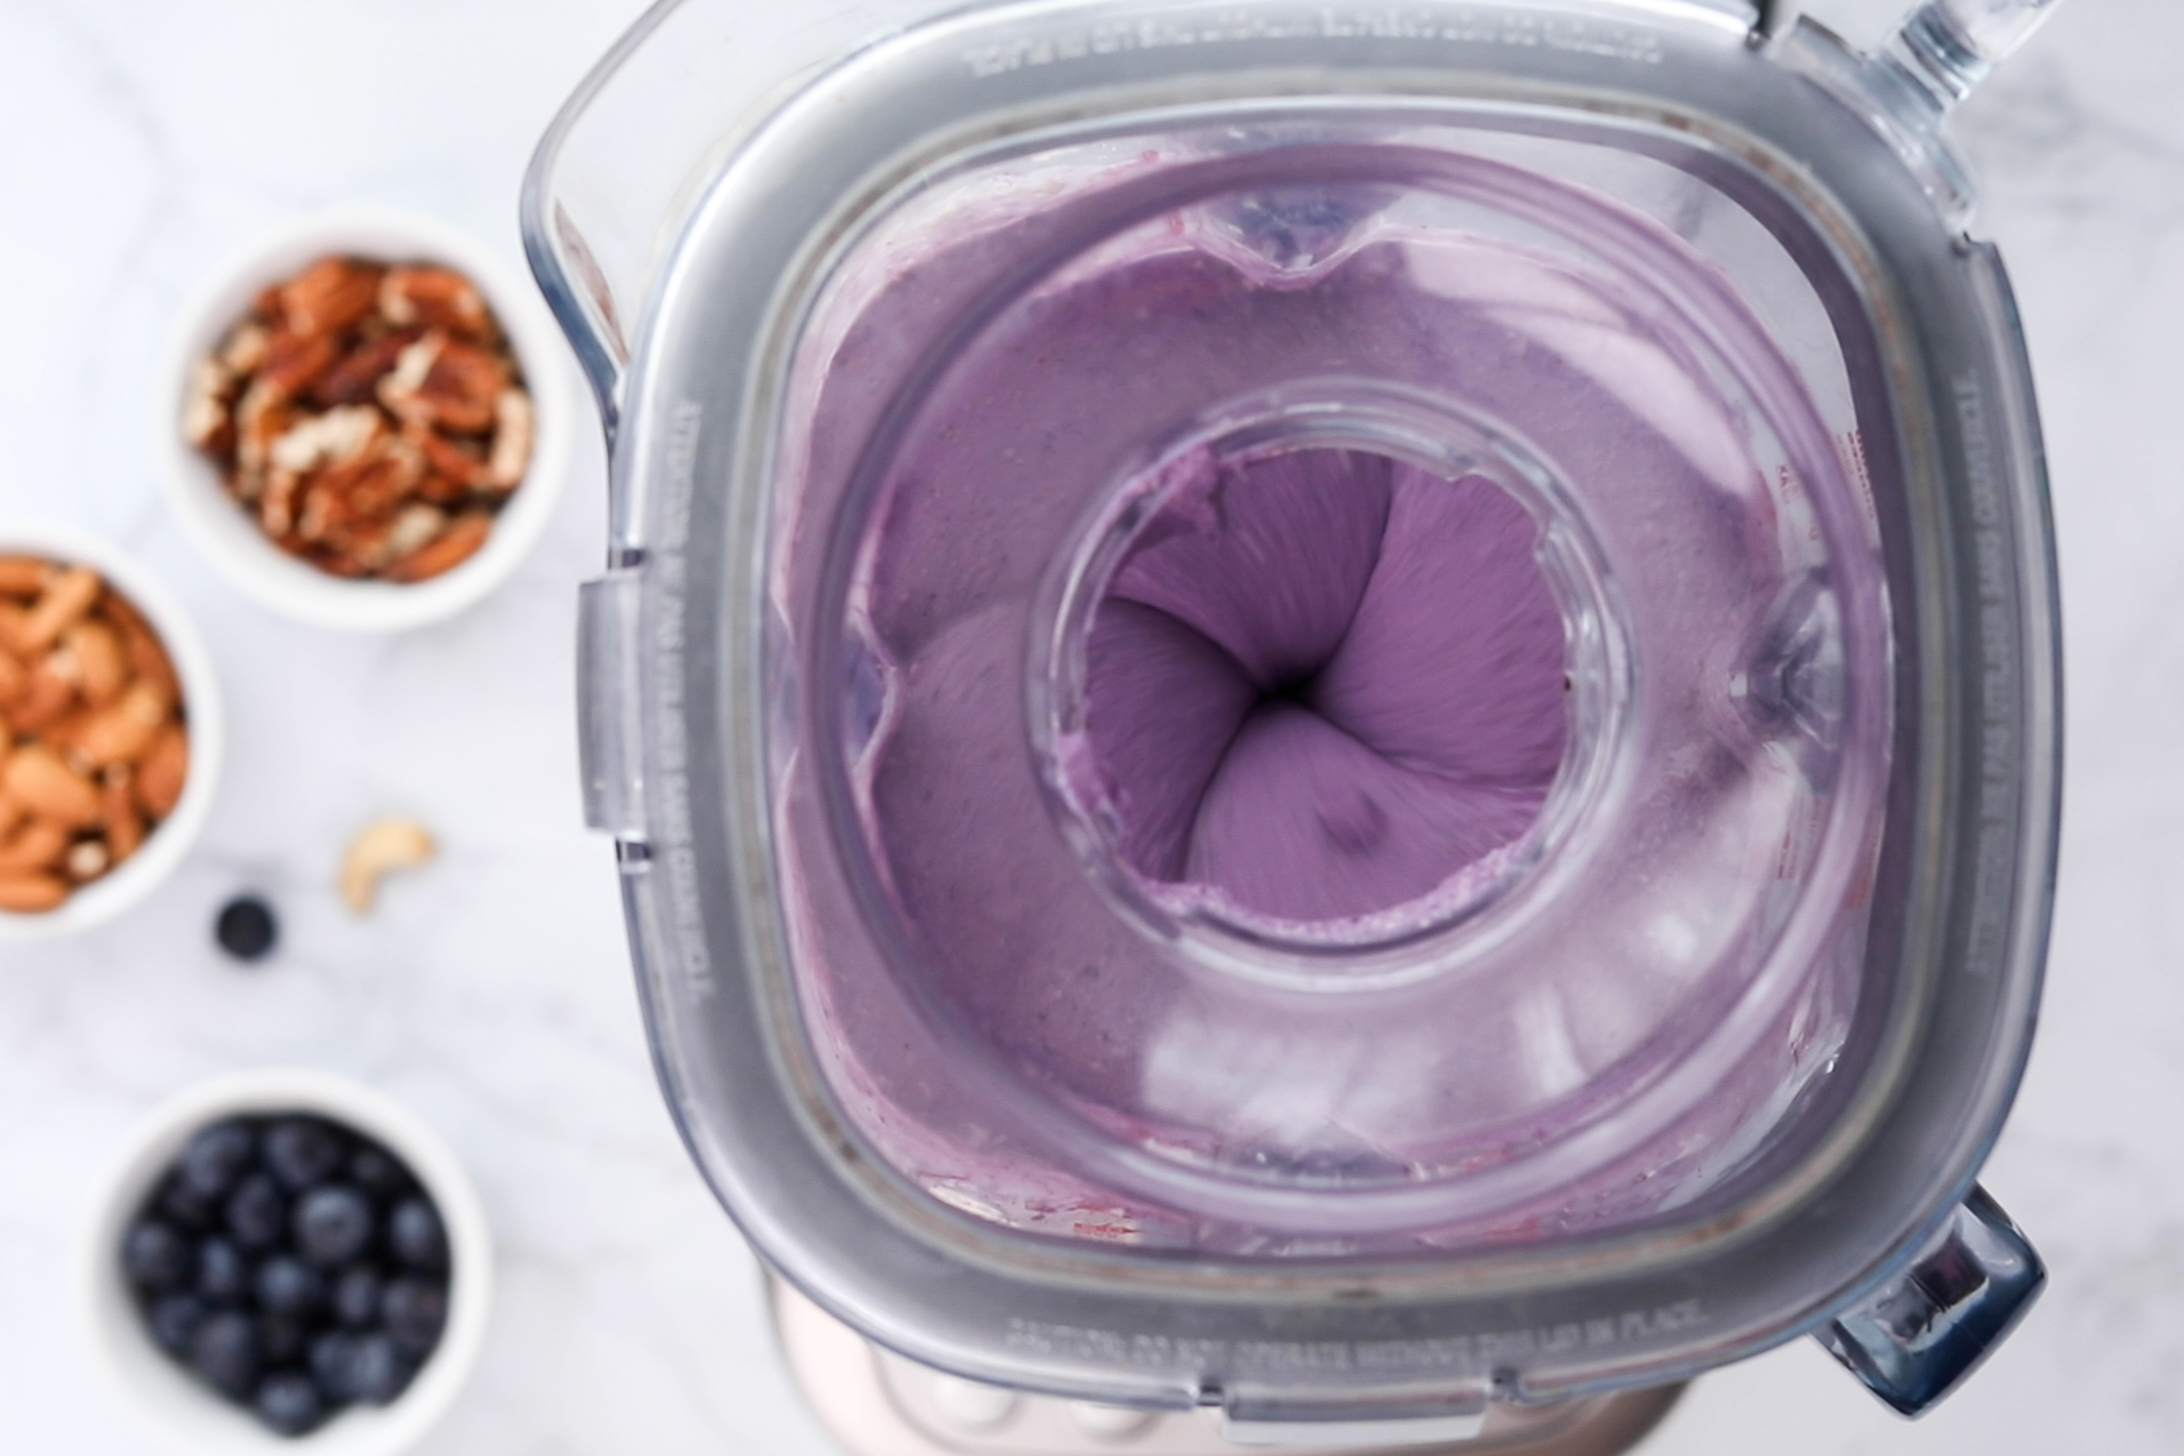 Top-down image capturing a blender in action blending creamy blueberry filling, with ramekins of nuts and berries visible in the background.